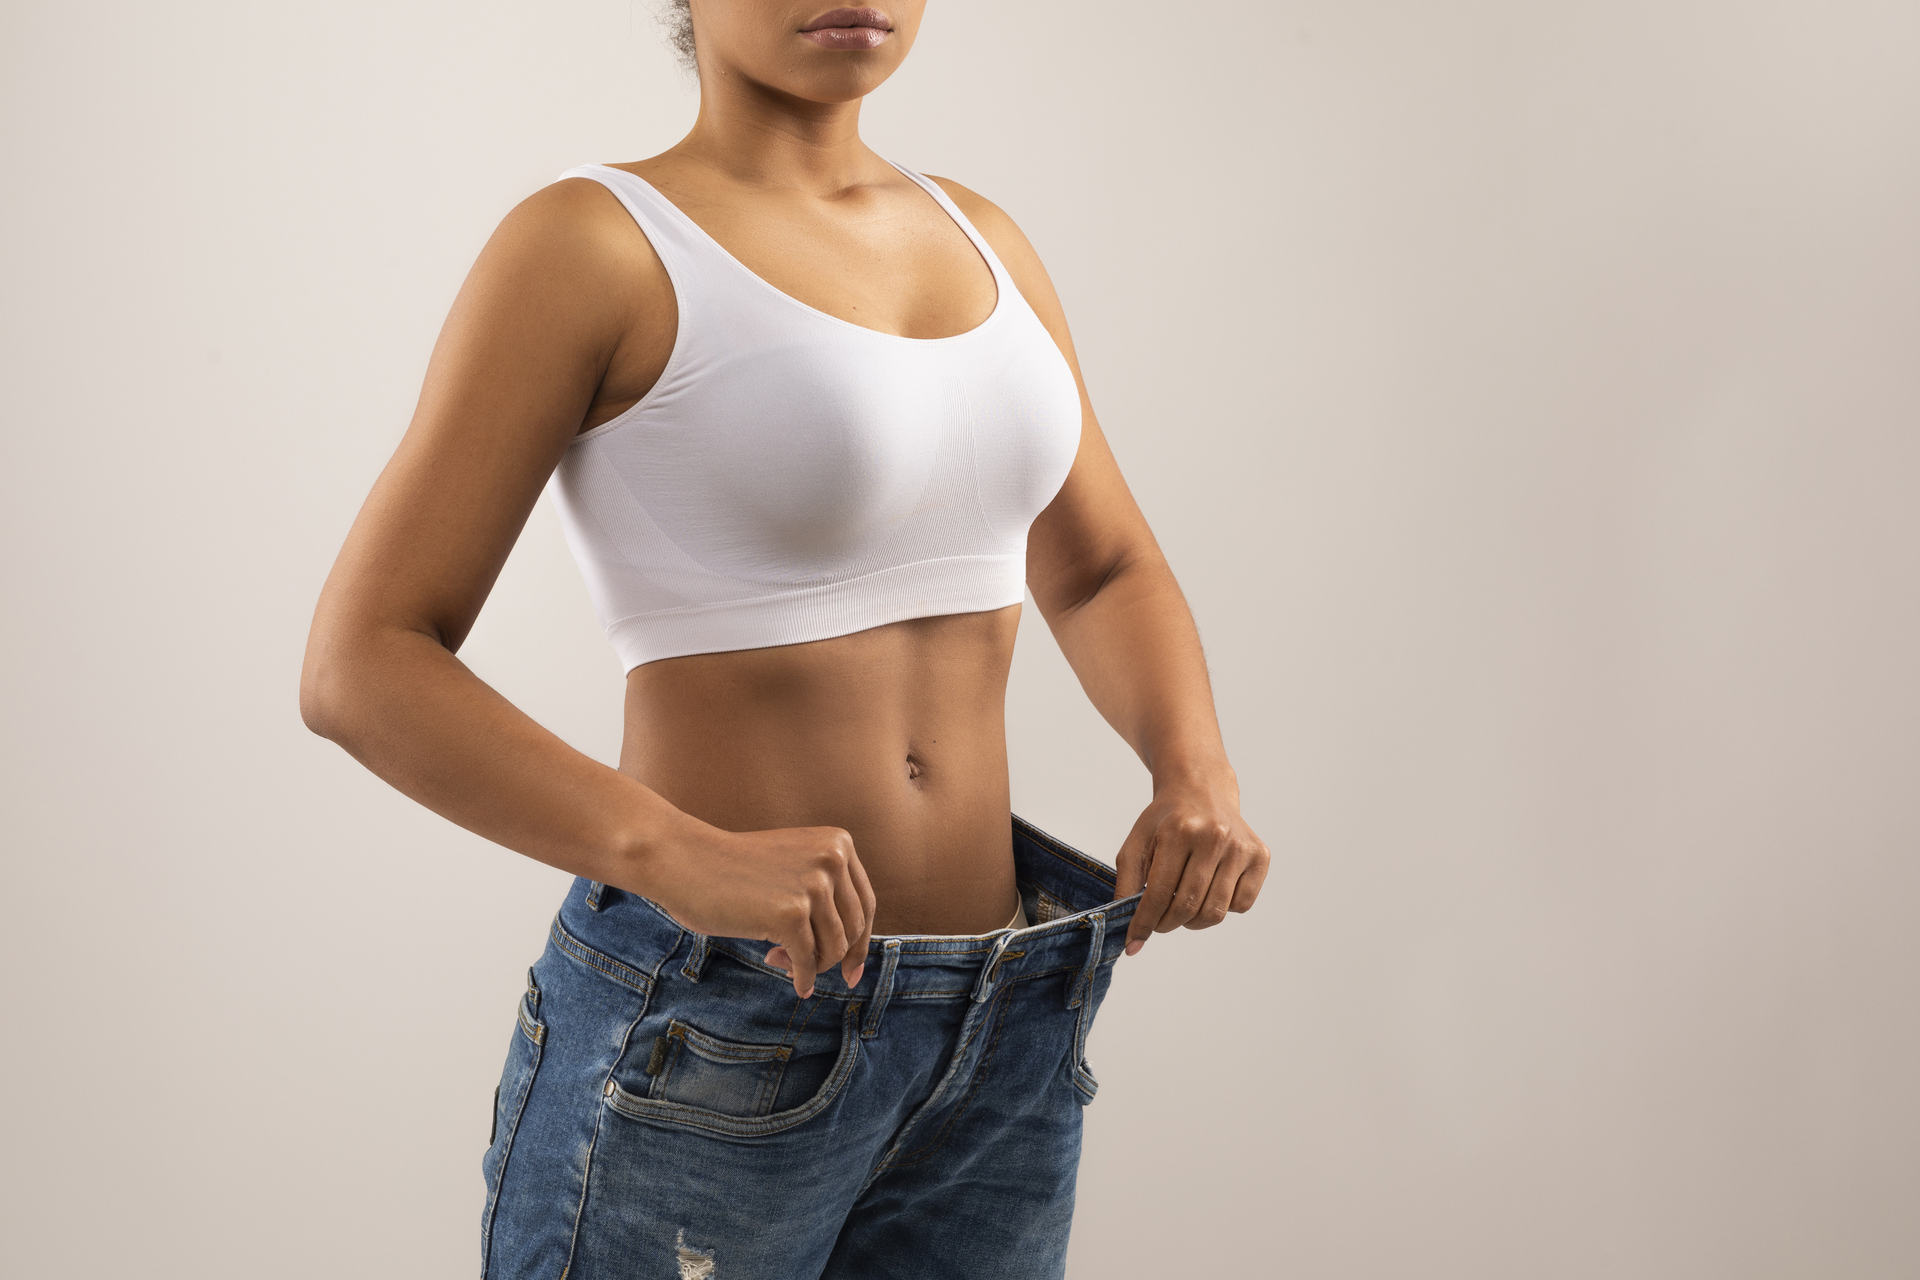 10 Healthy Ways to Lose Belly Fat Fast